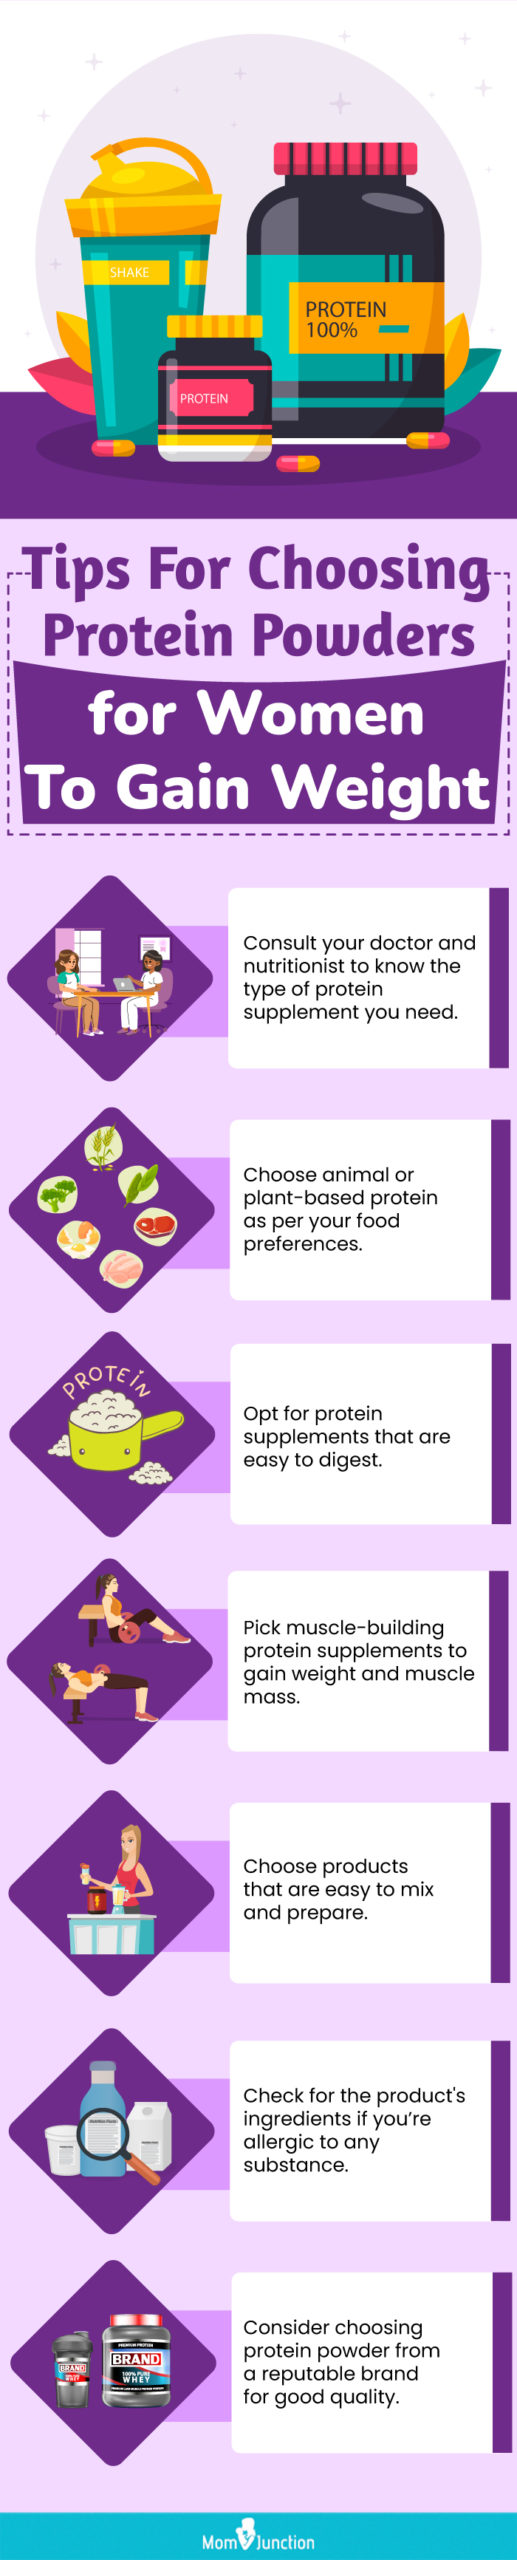 Tips For Choosing Protein Powders For Women To Gain Weight (infographic)